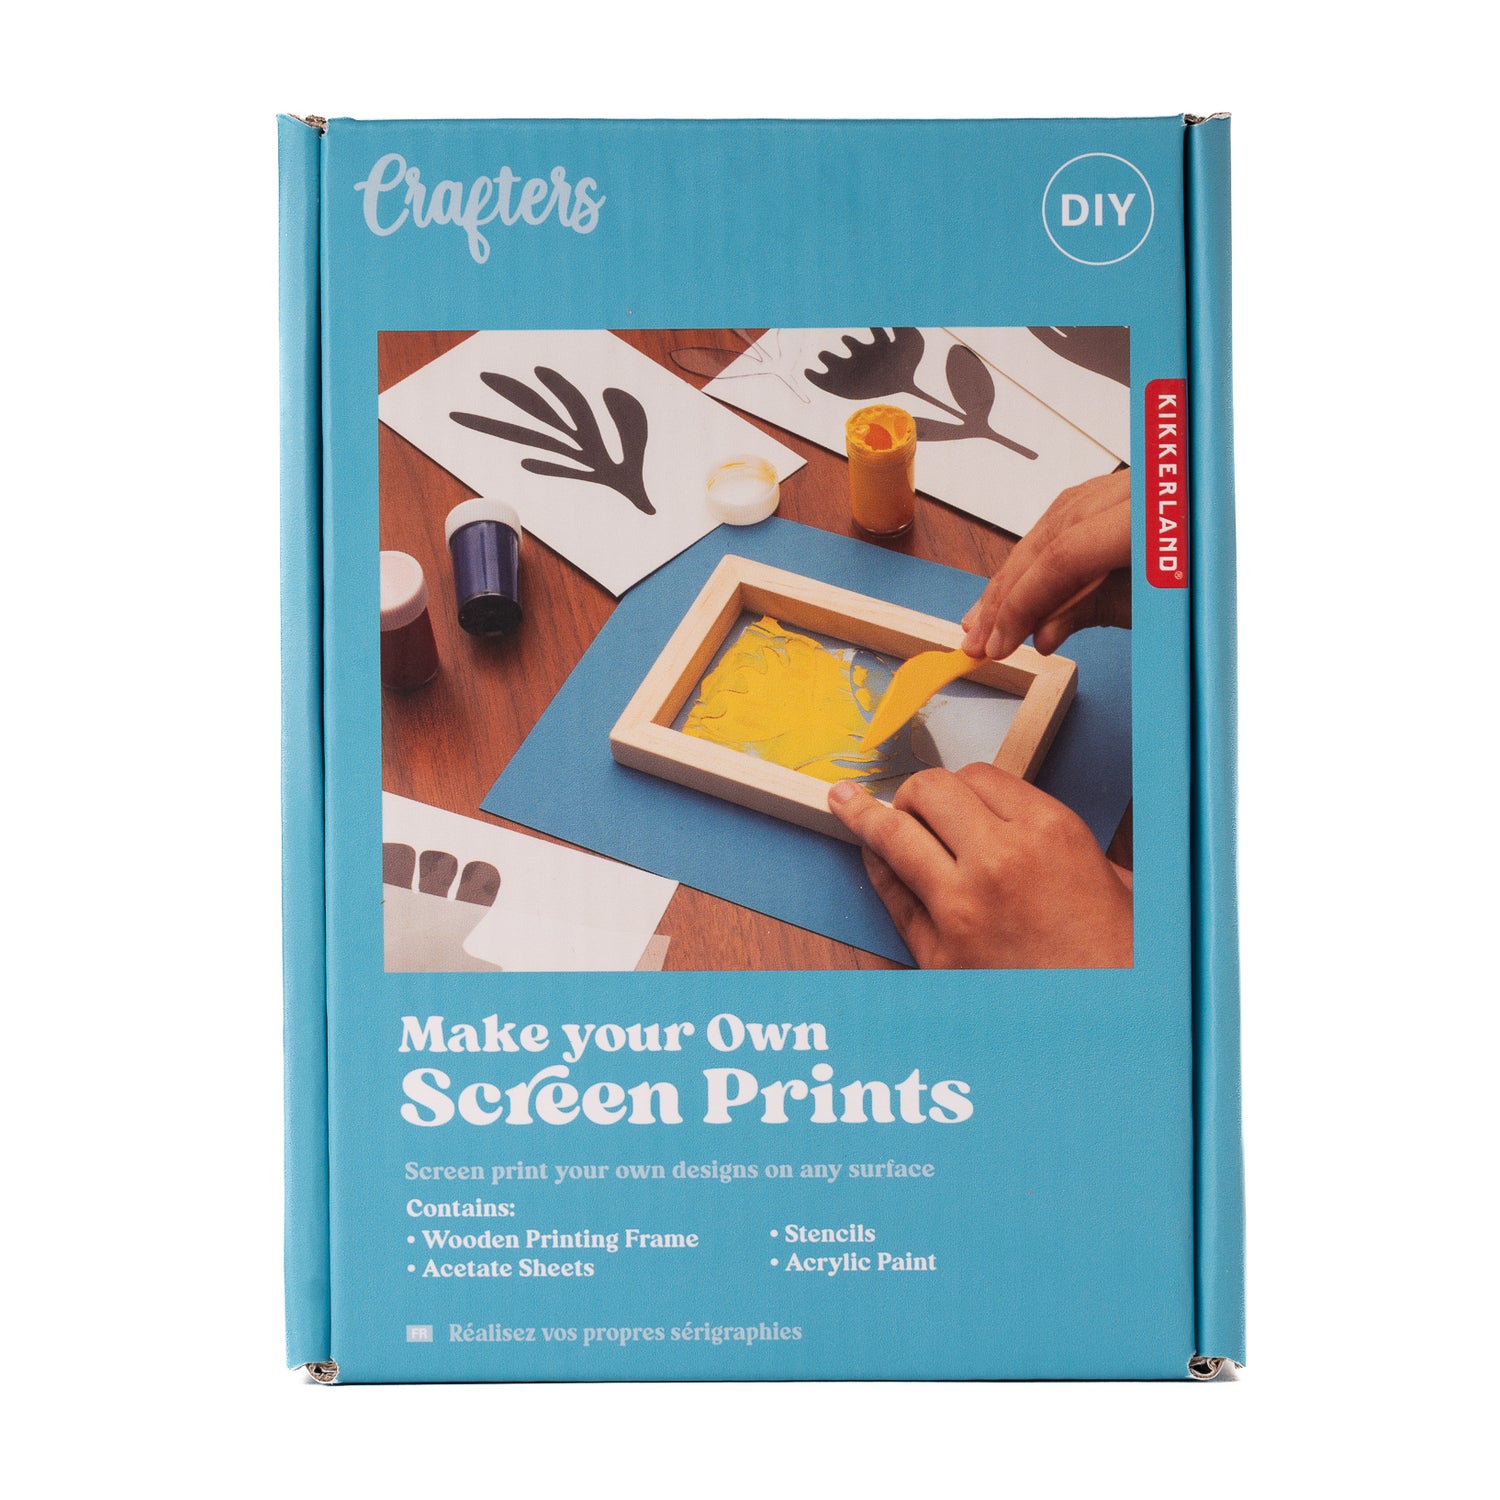 Crafter's Make Your Own Screen Prints